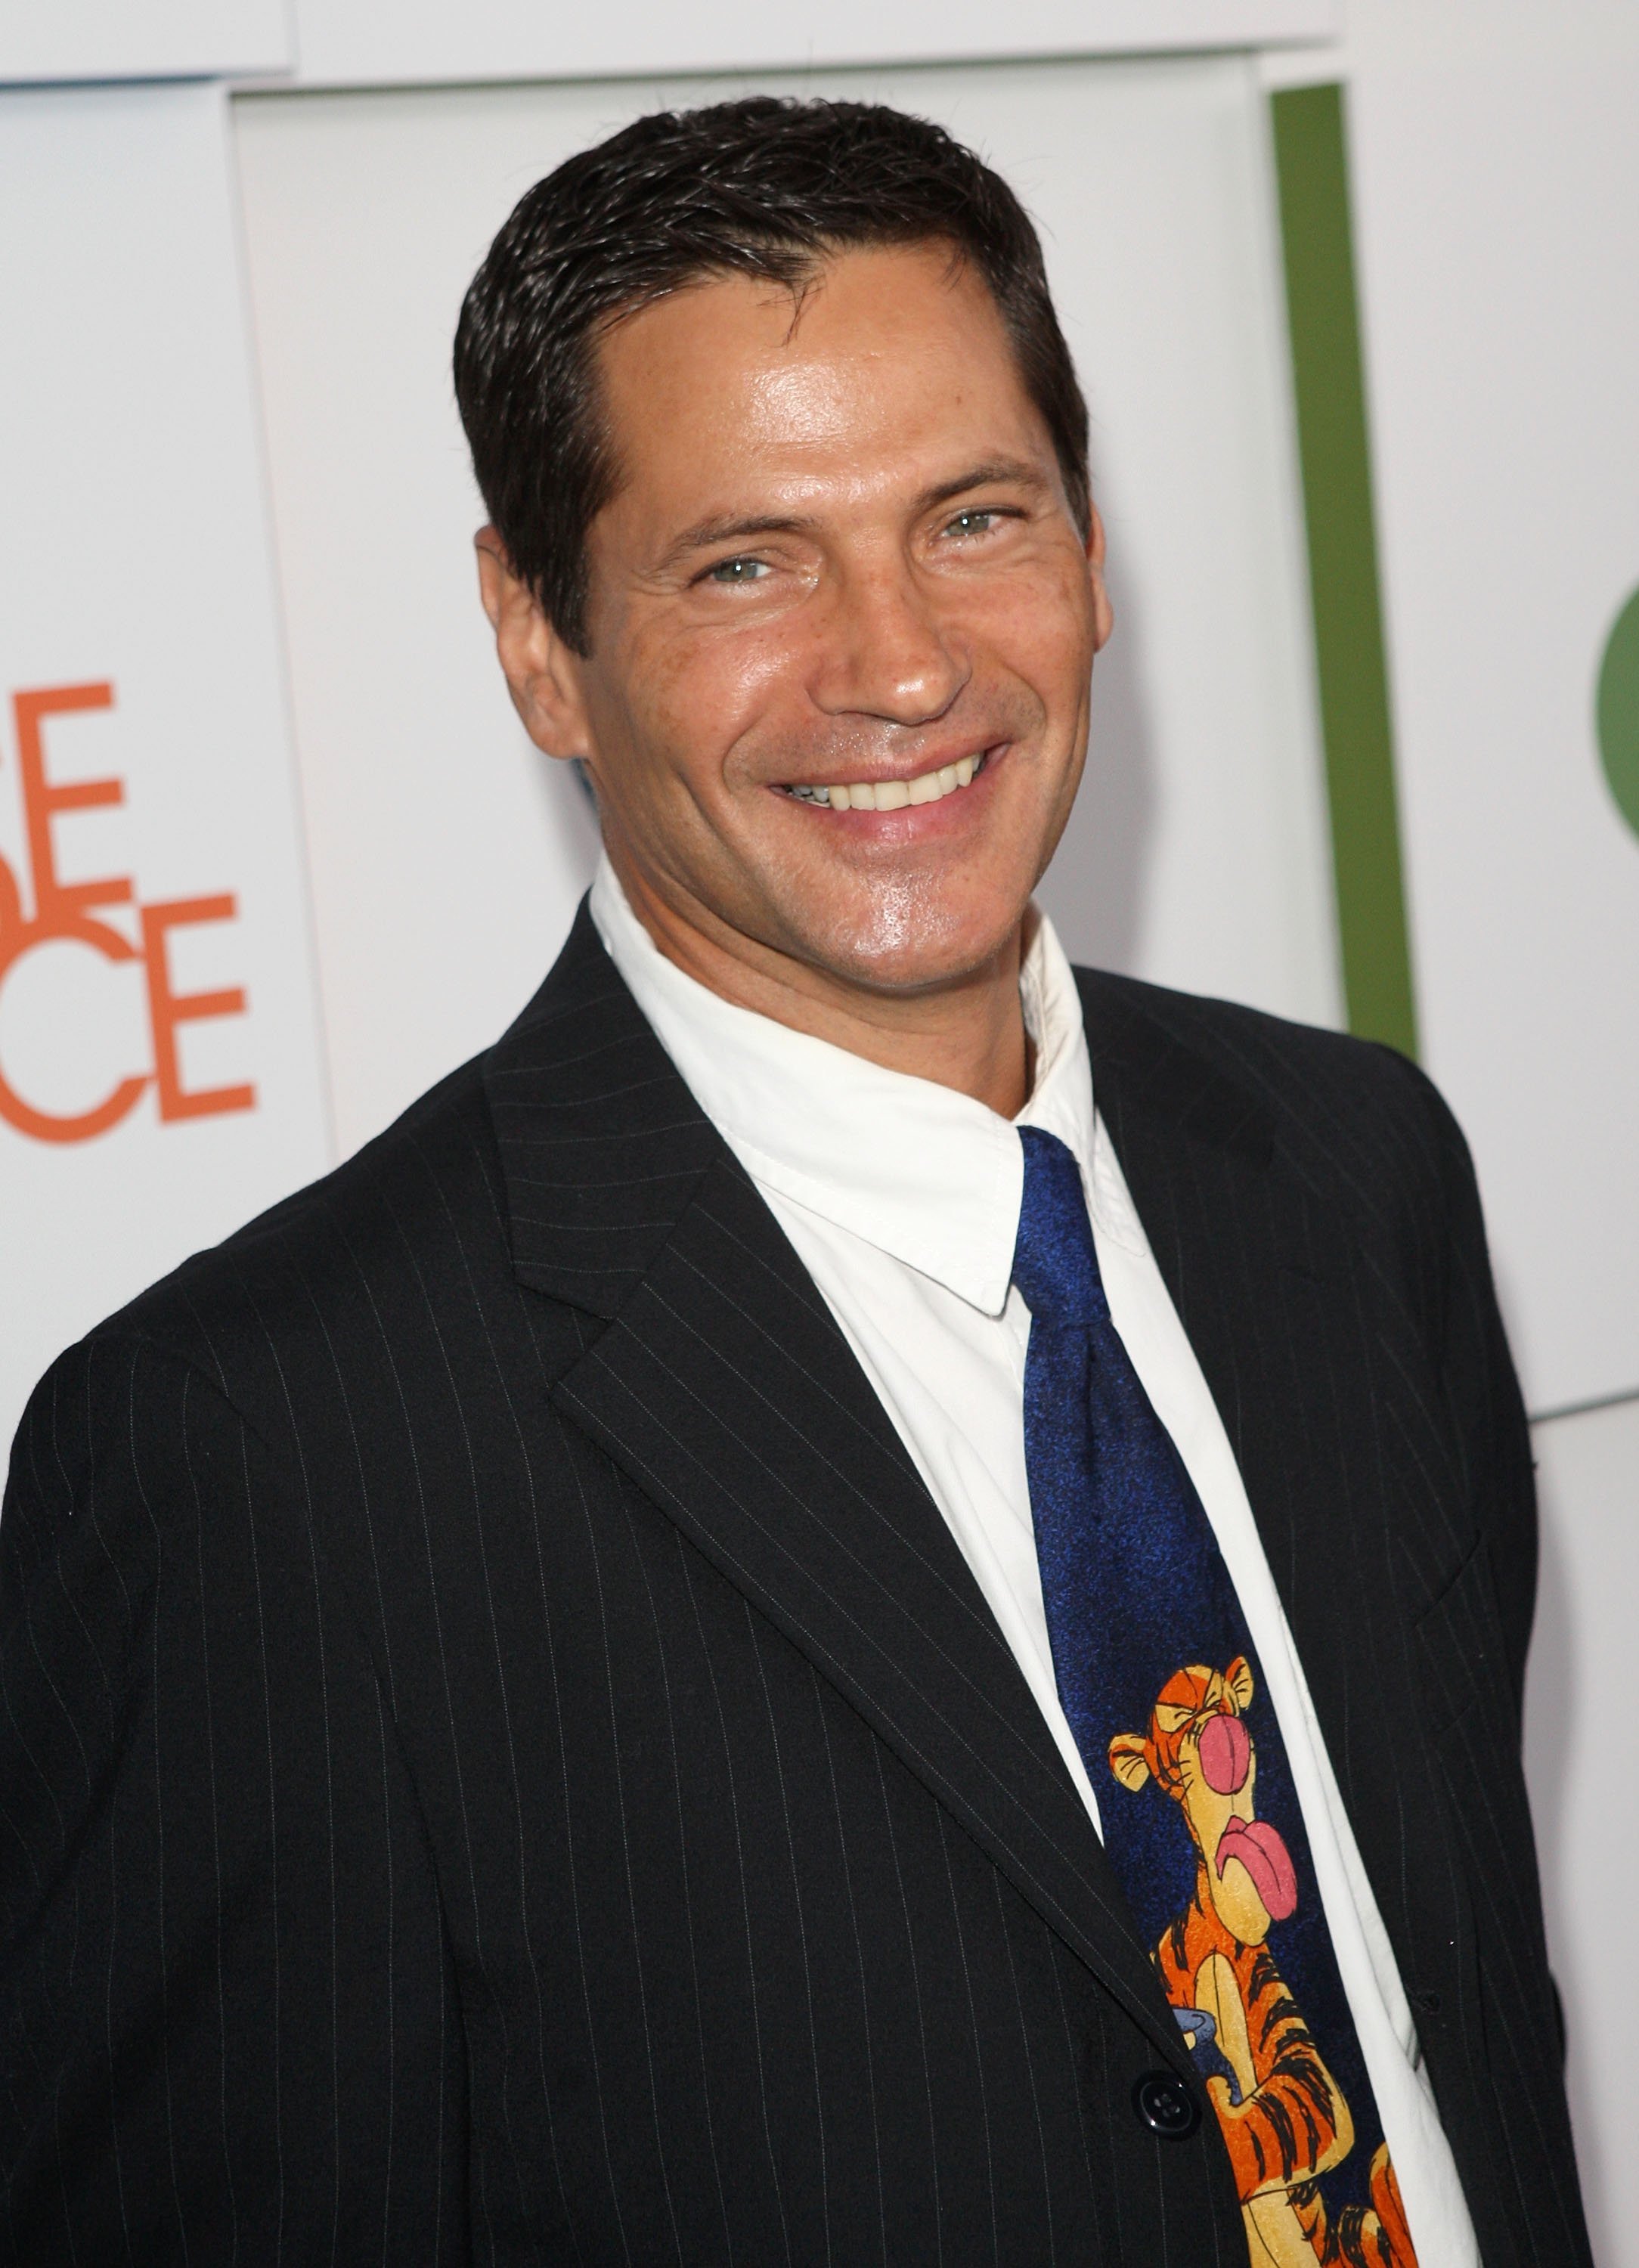 Thomas Calabro arrives at the CW & AT&T's "Melrose Place" premiere party on Melrose Place on August 22, 2009, in Los Angeles, California. | Source: Getty Images.